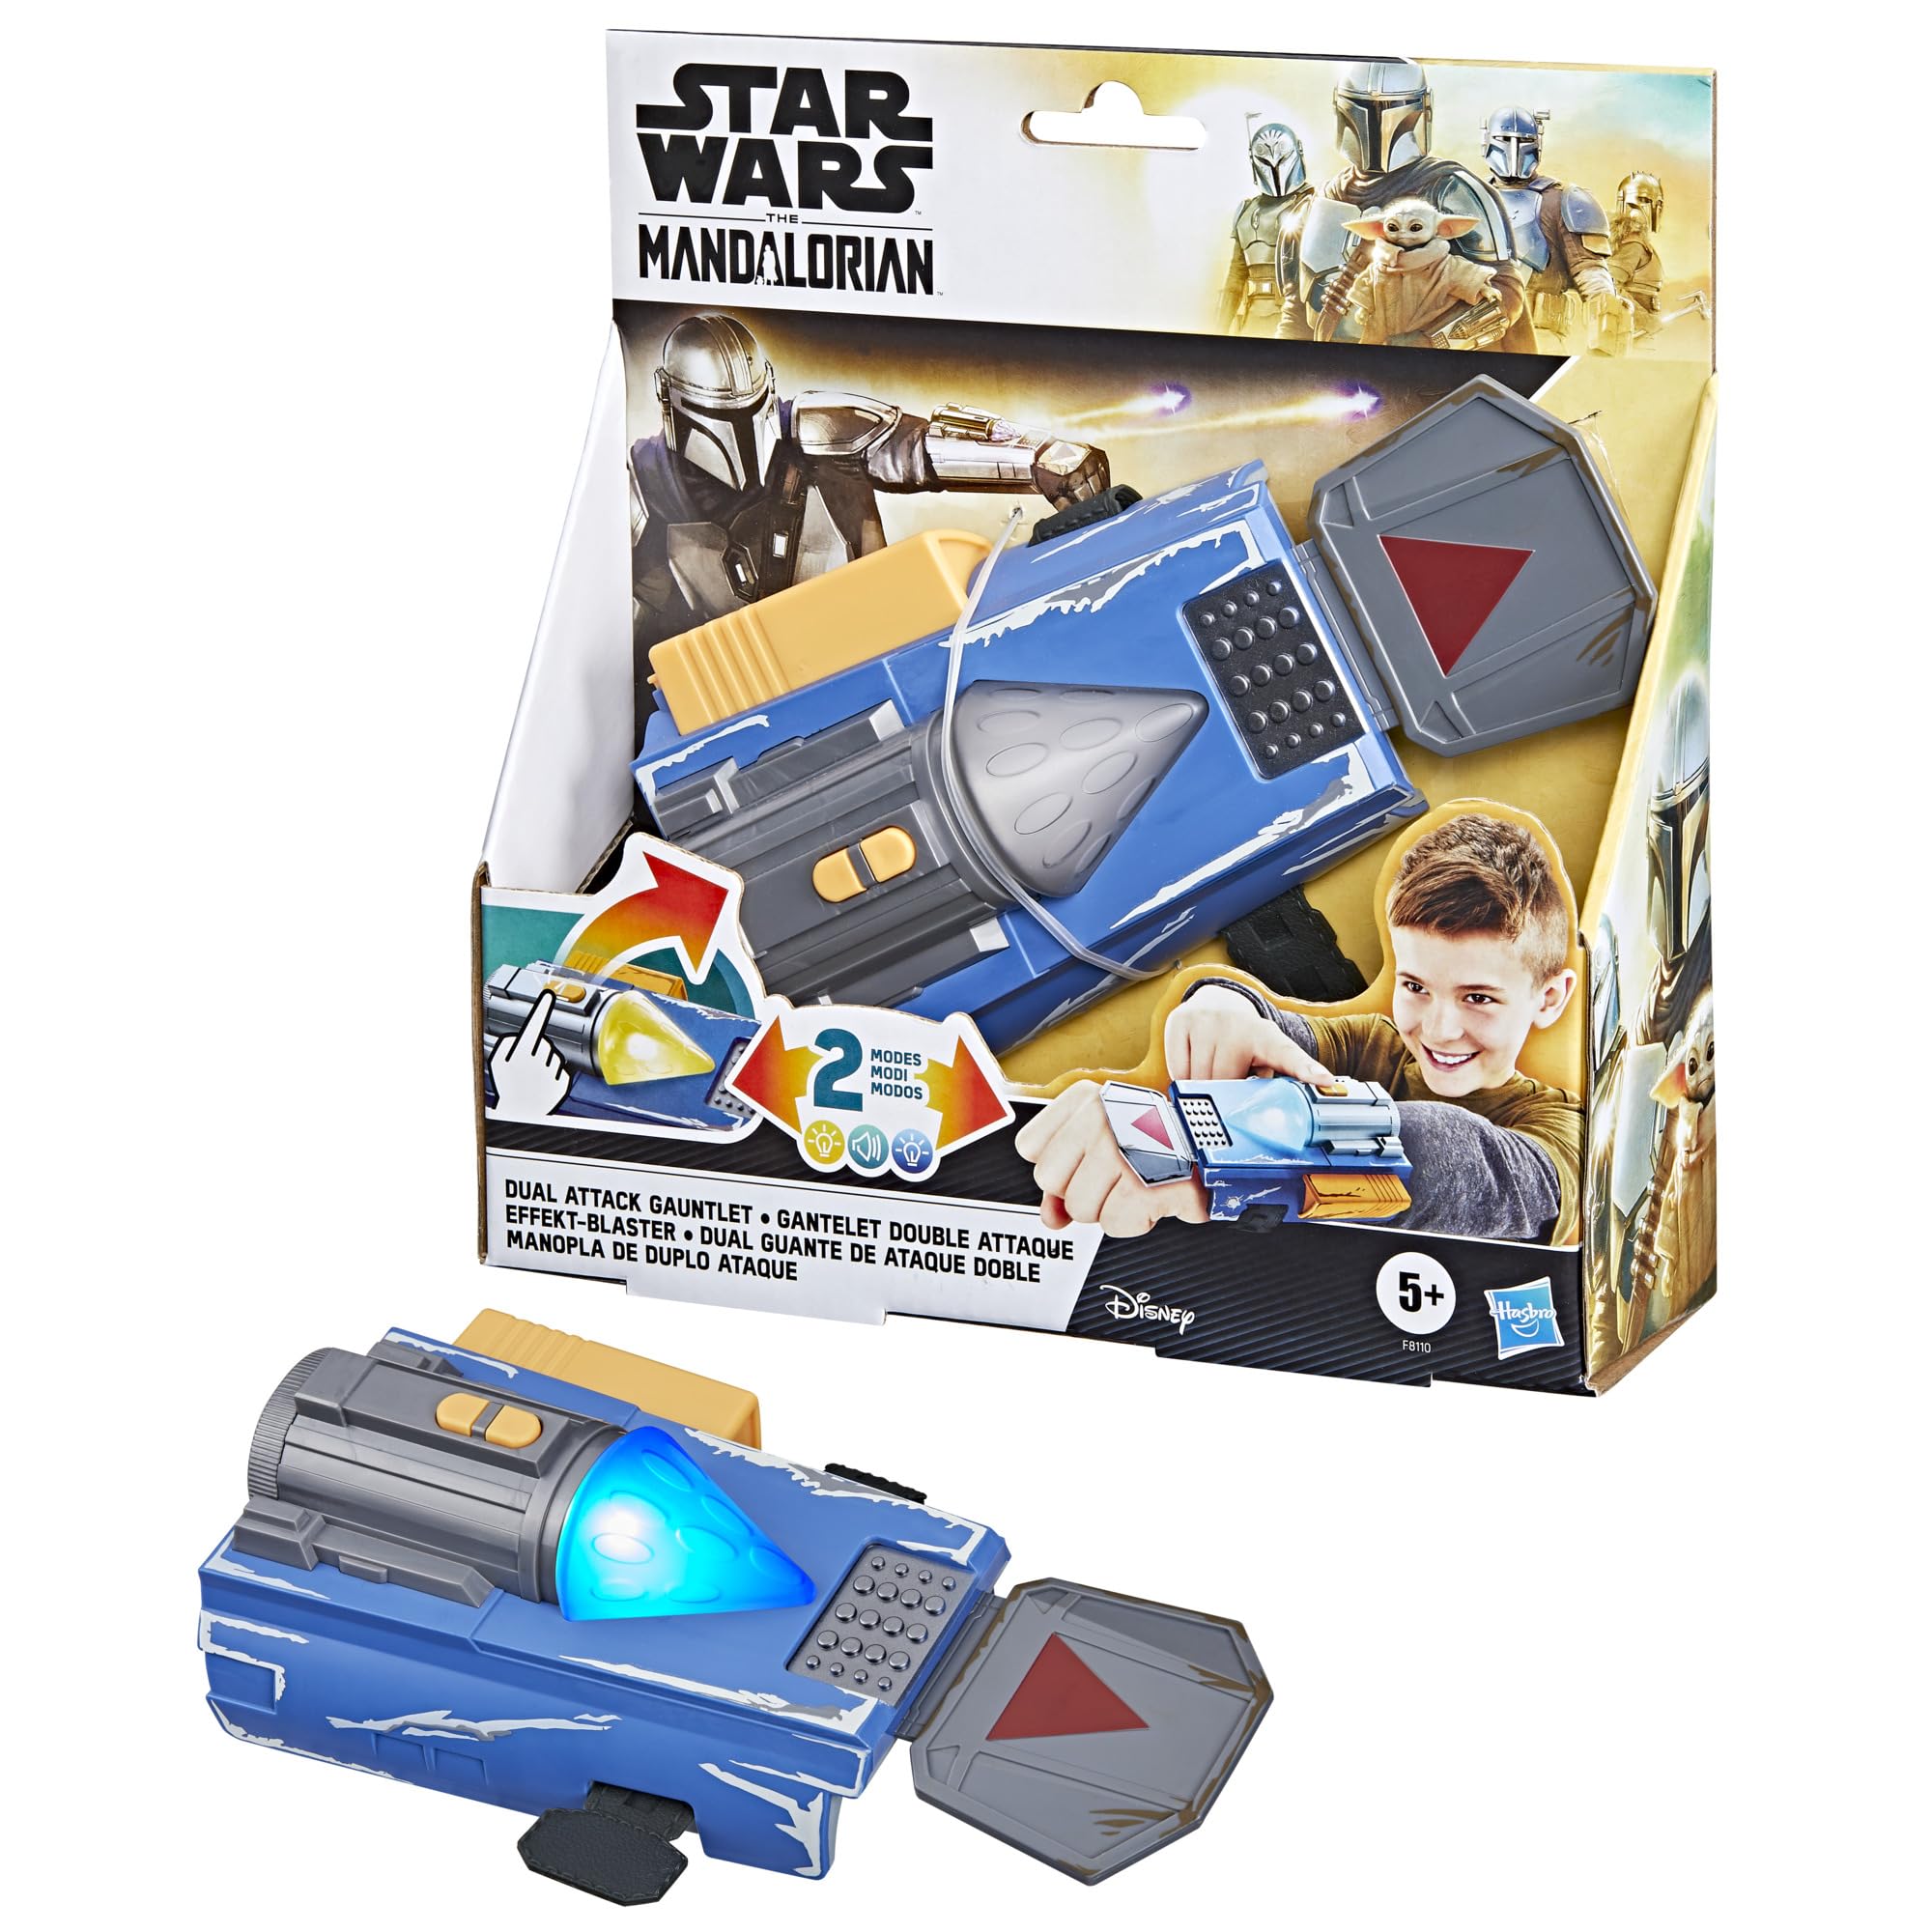 STAR WARS The Mandalorian Dual Attack Gauntlet, Interactive Electronic Role Play with Lights & Sounds, Toys for 5 Year Old Boys and Girls